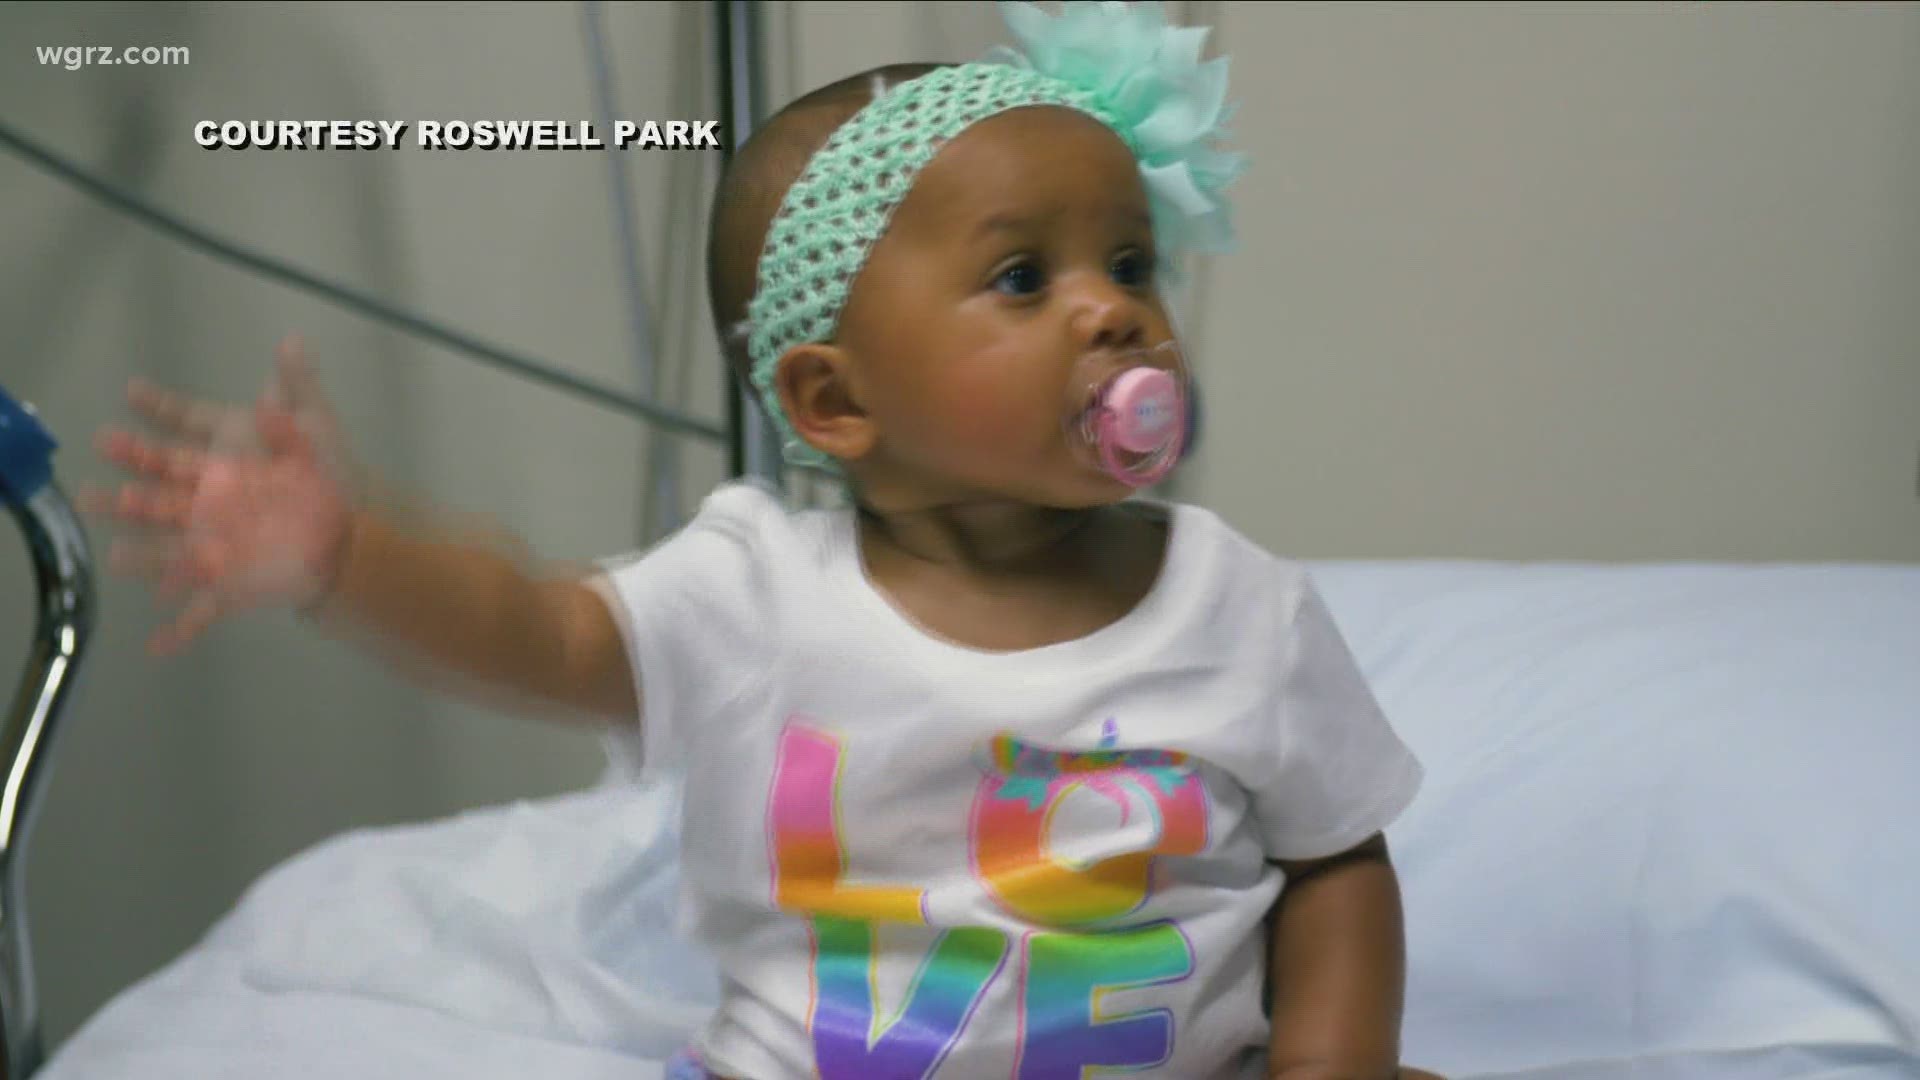 A new treatment for an aggressive form of leukemia means a Niagara Falls girl can celebrate her 2nd birthday this weekend.